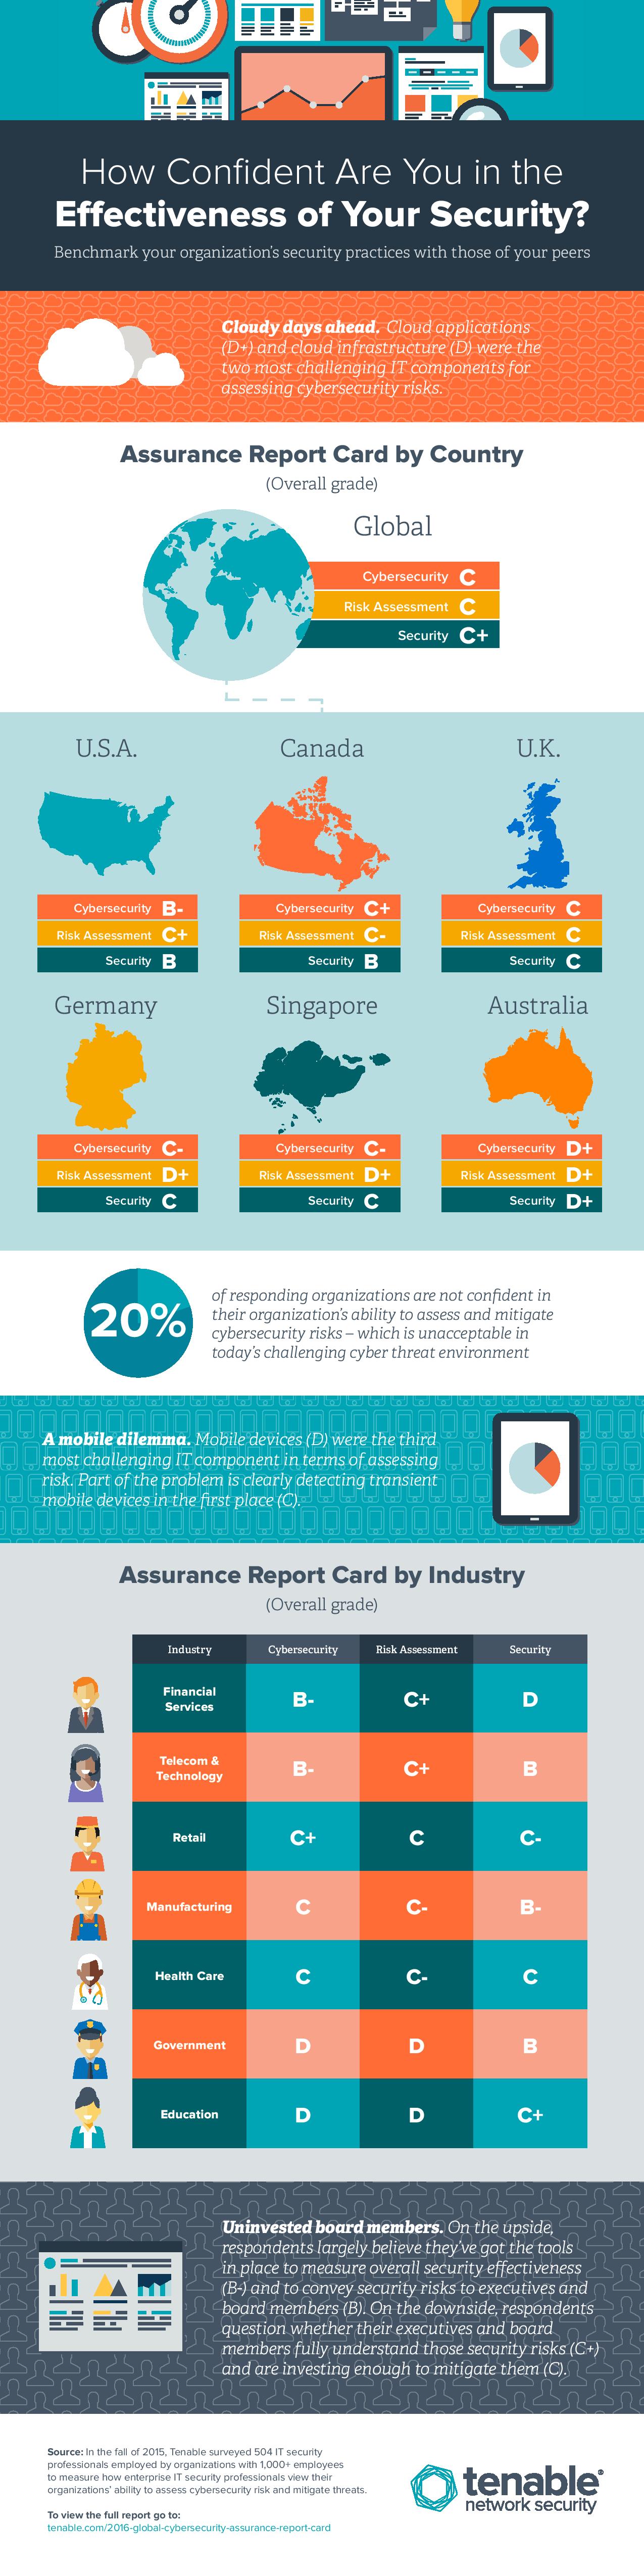 2016 Global Cybersecurity Assurance Report Card